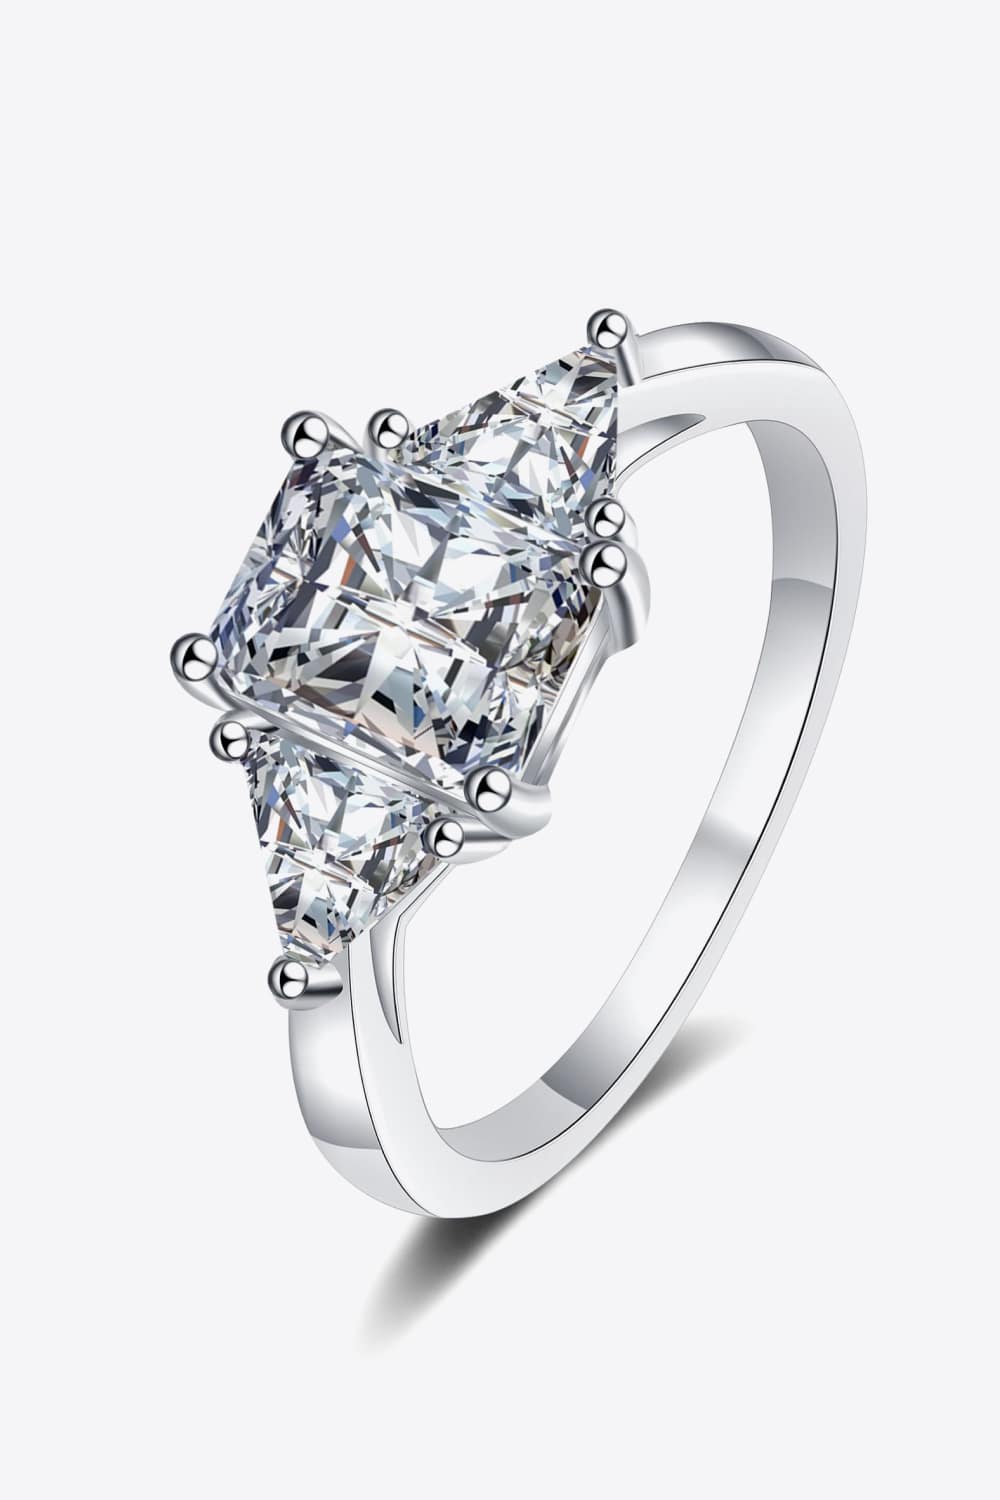 3 Carat Moissanite 925 Sterling Silver Rhodium-Plated Ring  (PREORDER)